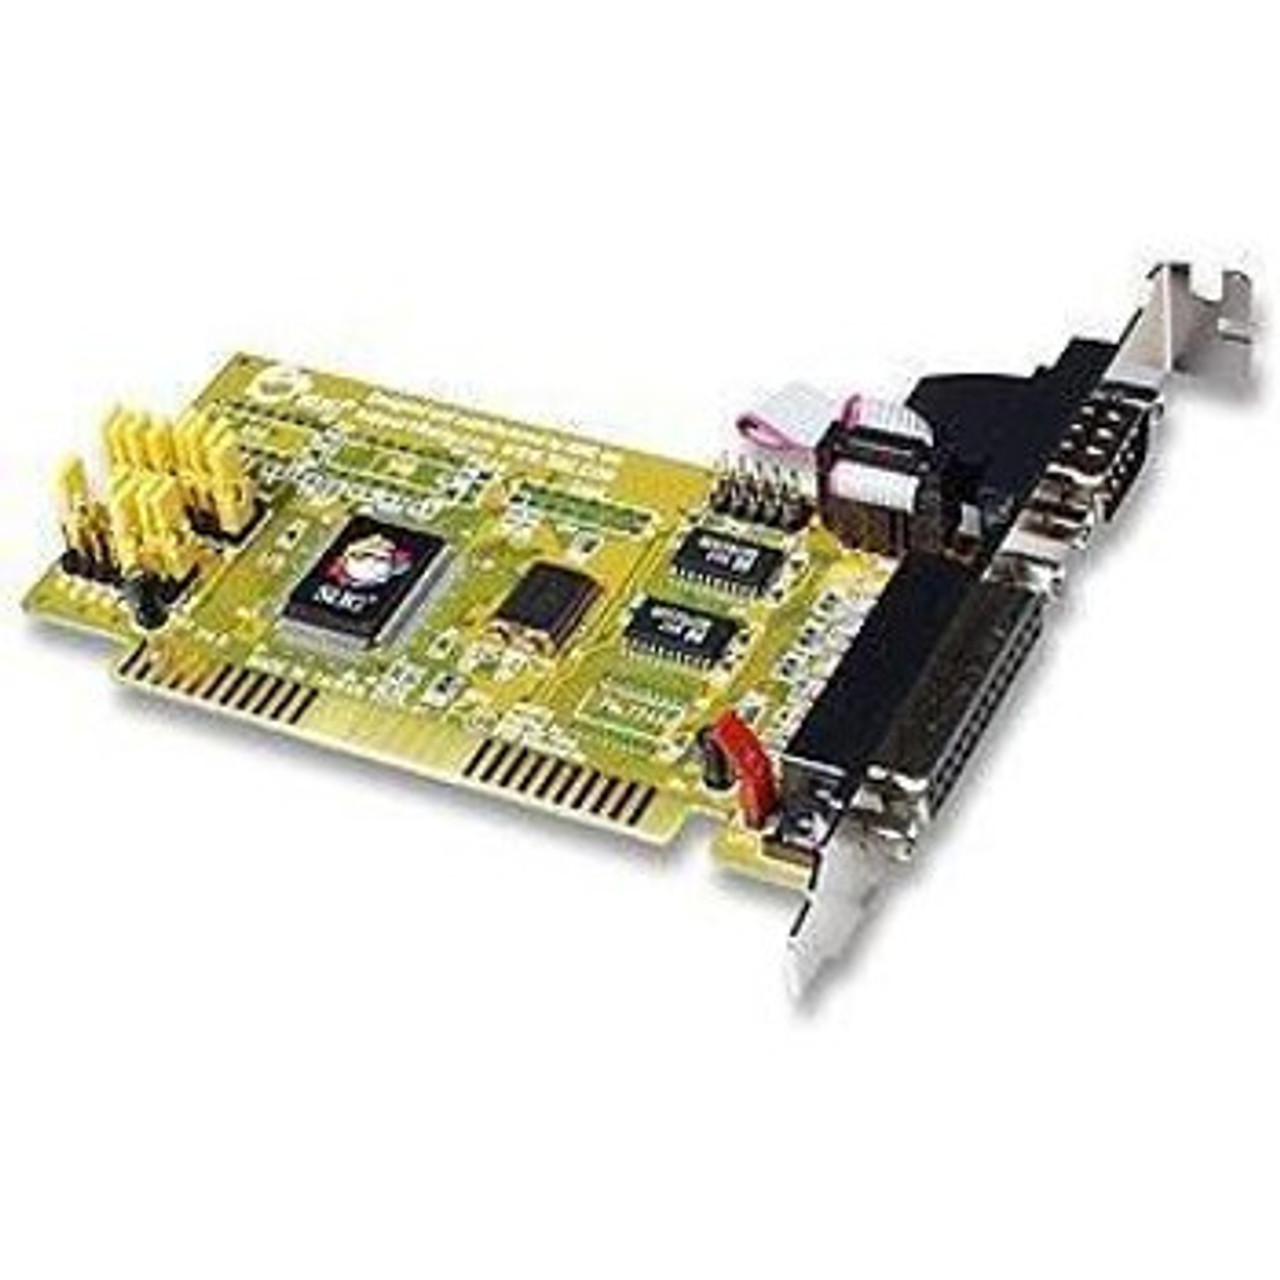 JJ-A21012 | SIIG | Io1809 Serial/Parallel Combo Adapter 2 X 9-Pin Db-9 Male Rs-232 Serial 1 X 25-Pin Db-25 Female Ieee 1284 Parallel